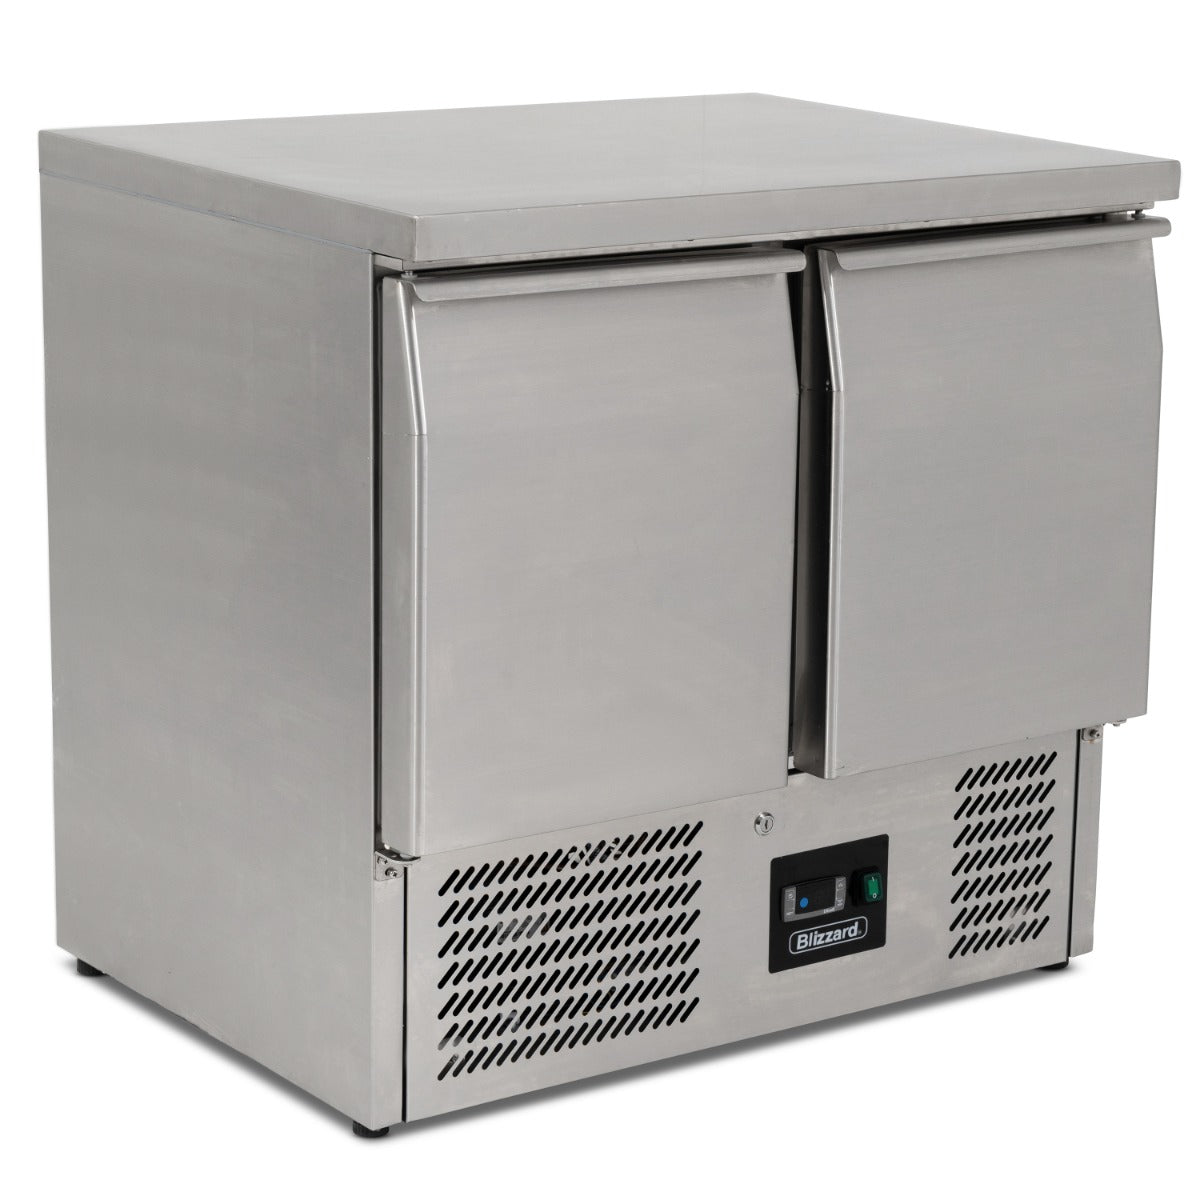 Blizzard 2 Door Compact Gastronorm Counter 240L